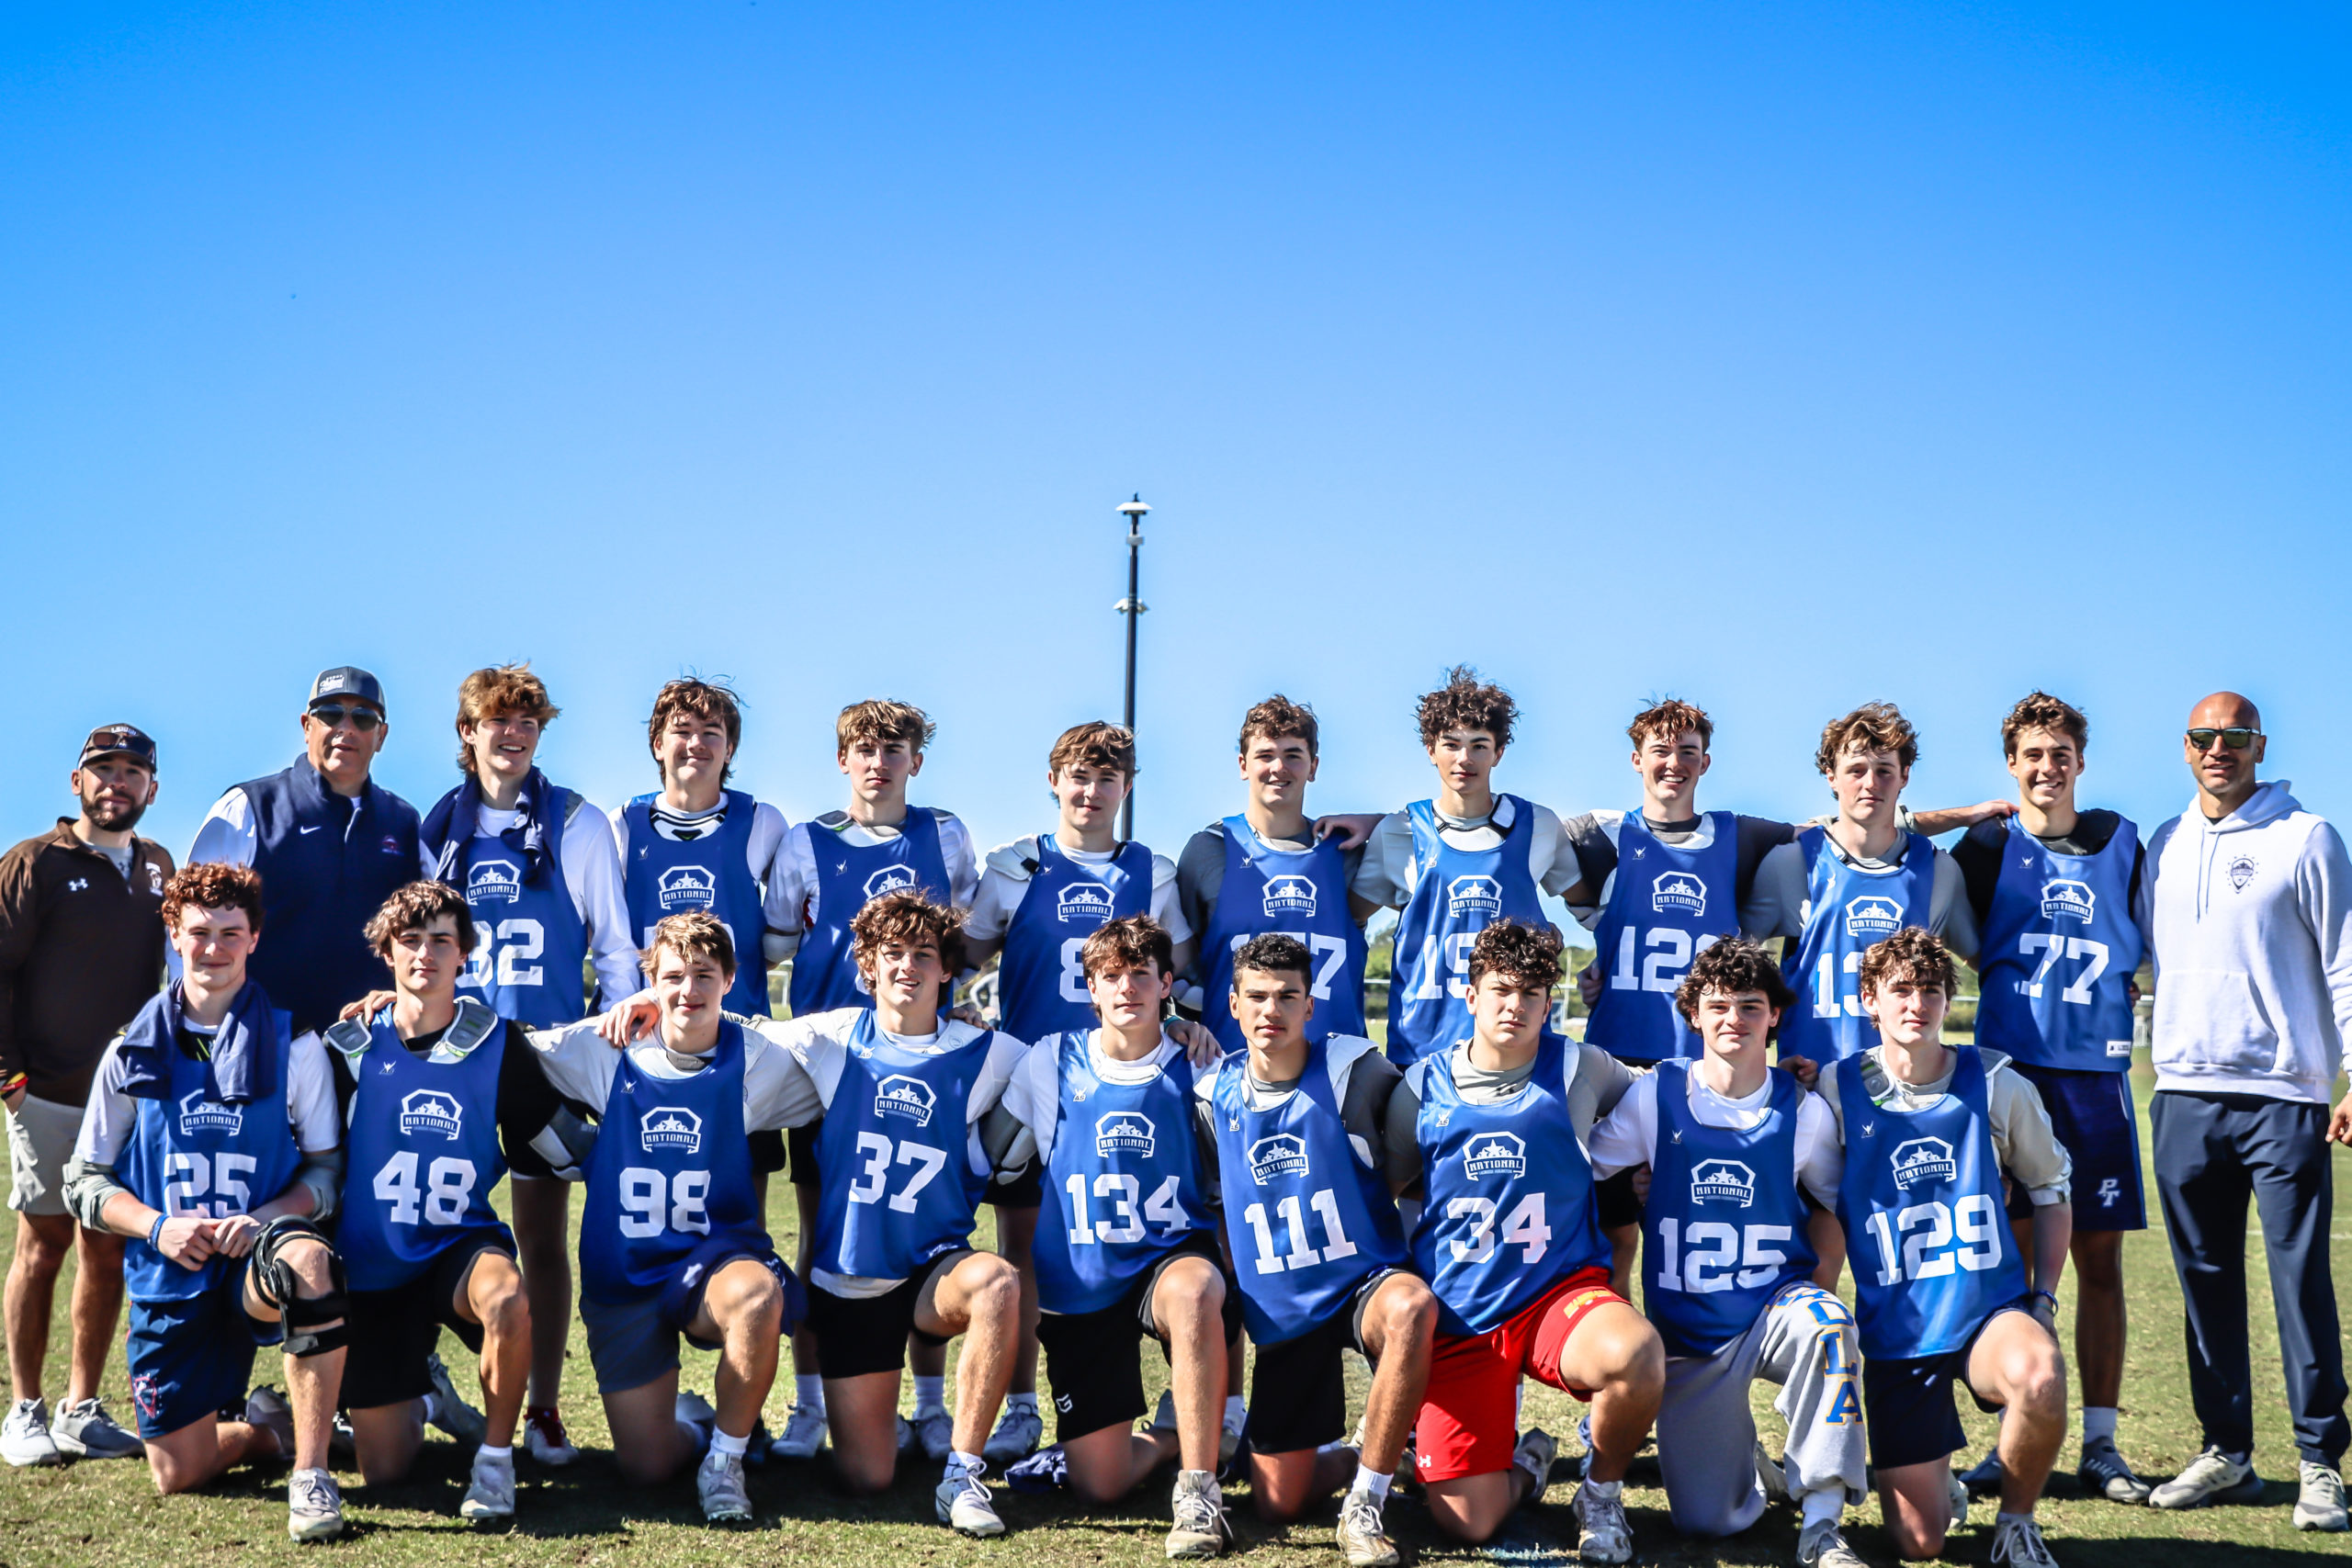 2022 NLF at IMG Class of 2025 and 2026 Standuts - National Lacrosse  Federation